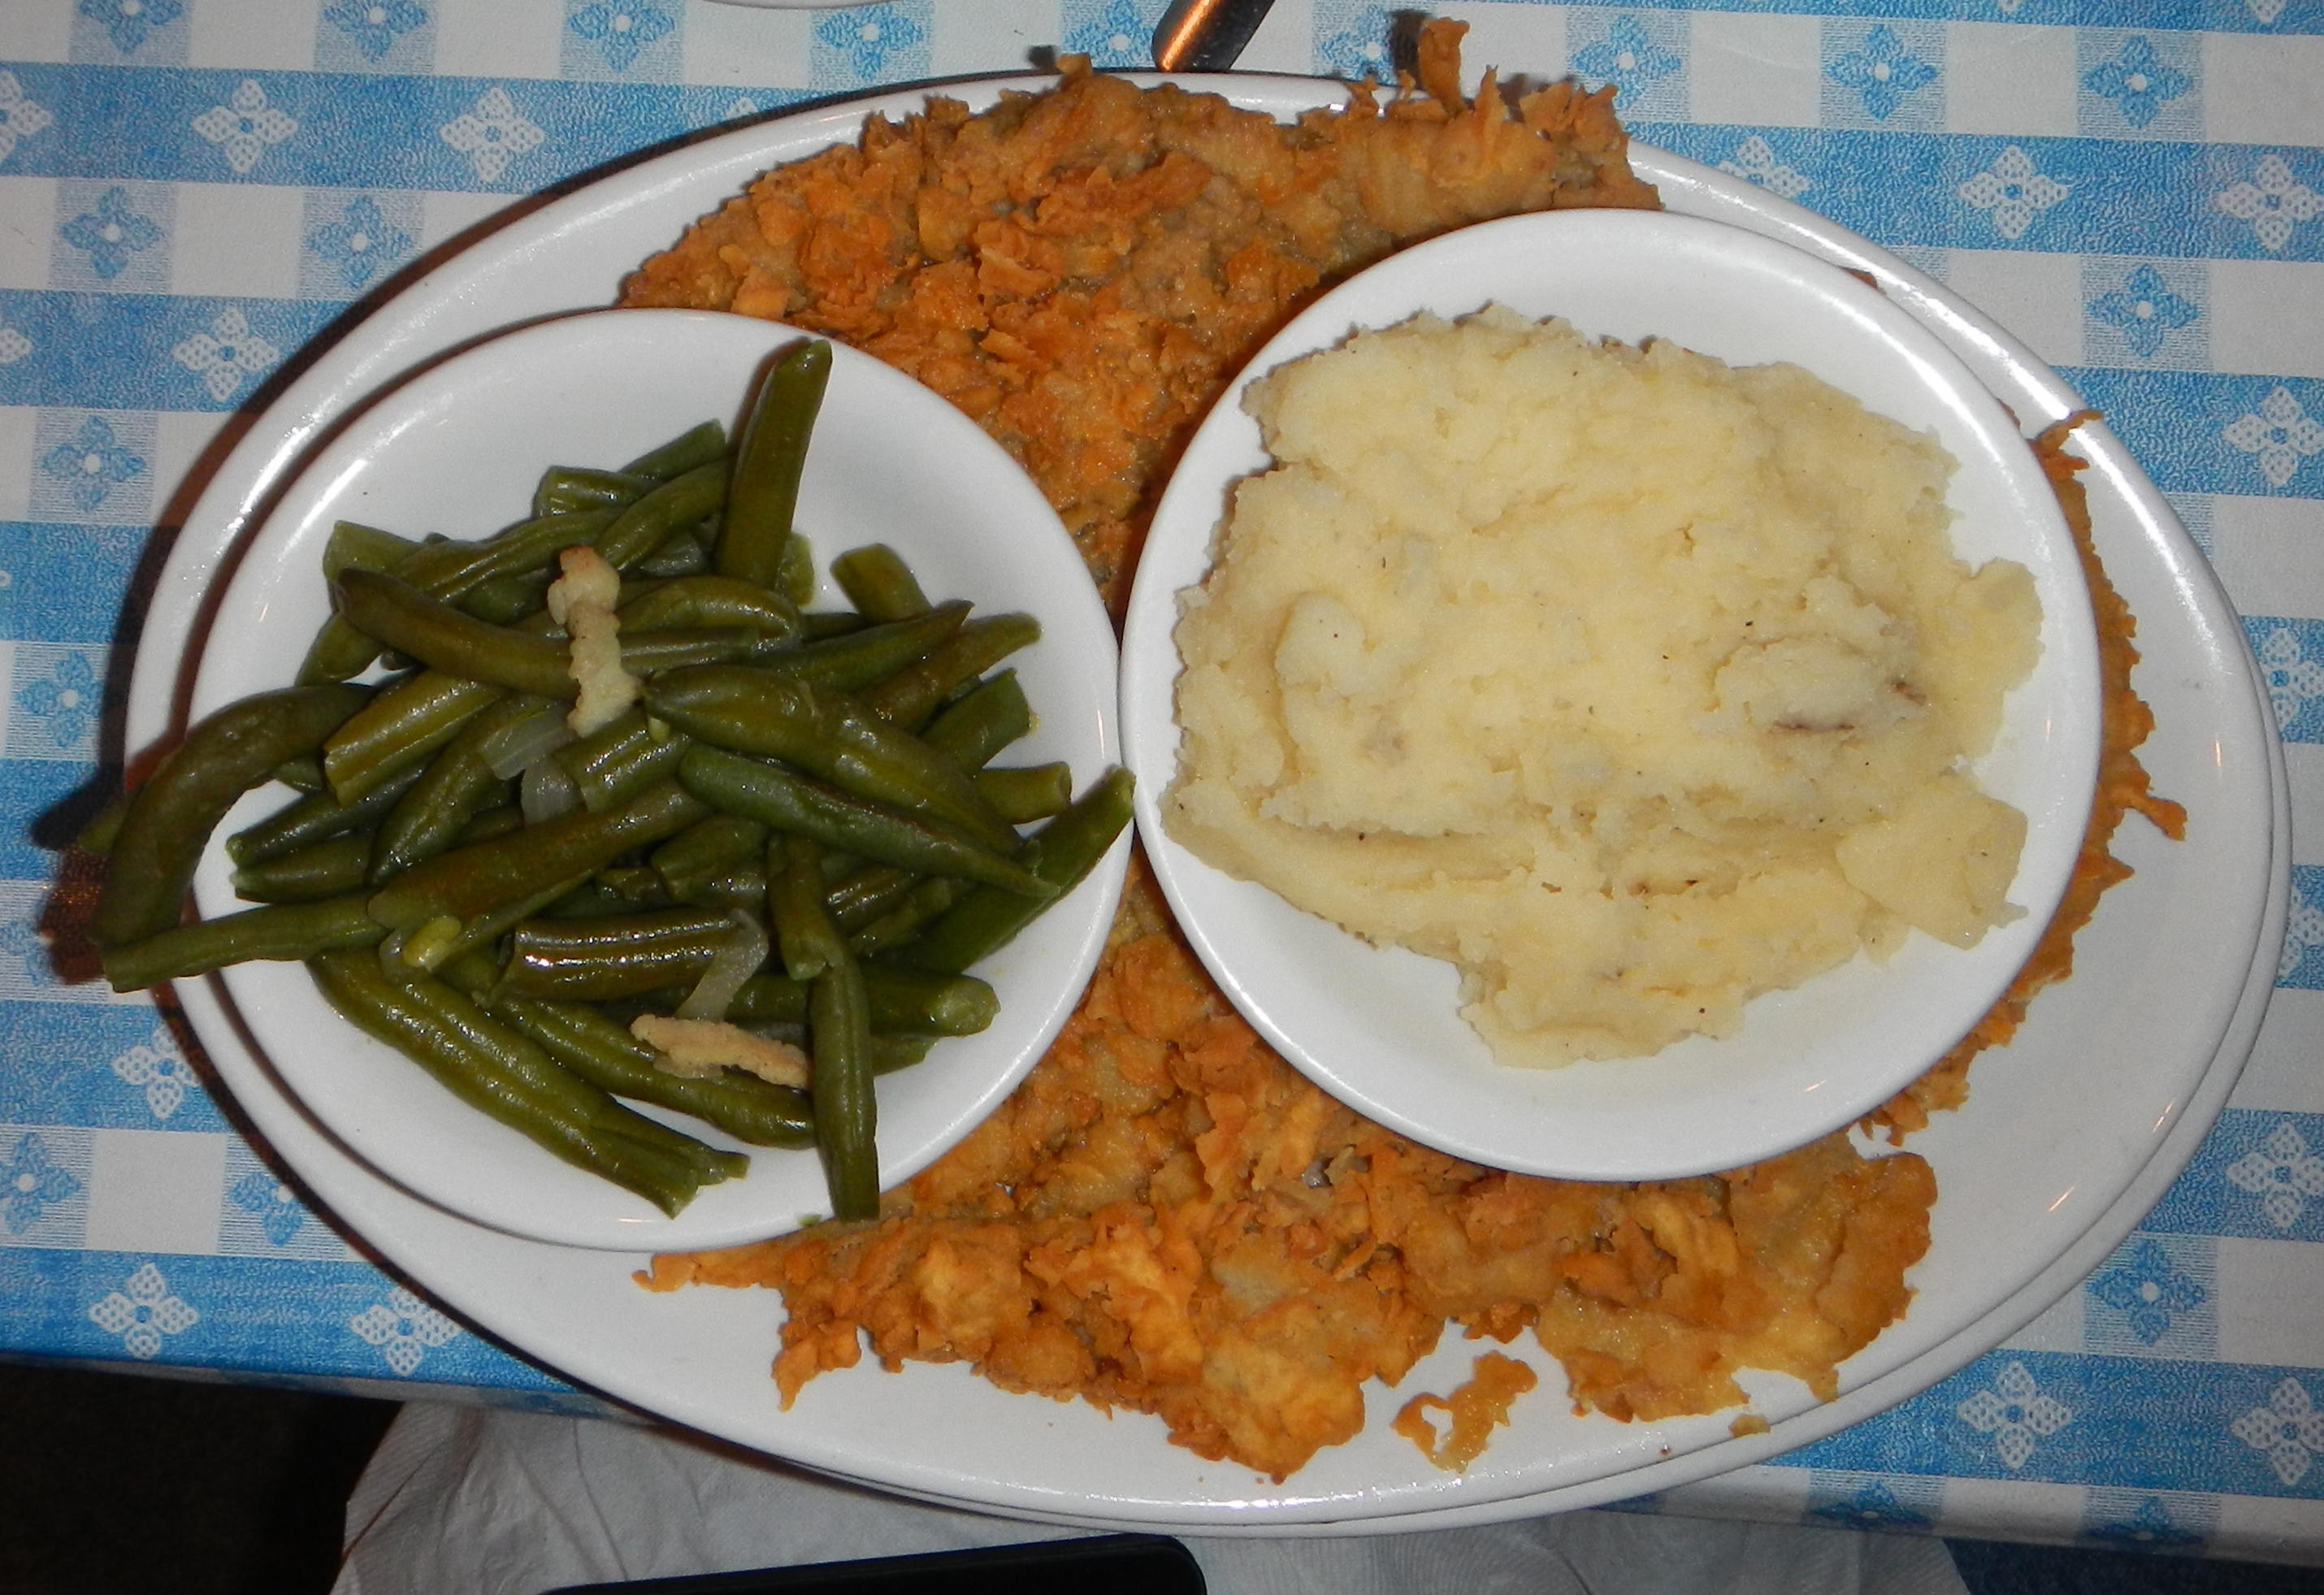 The Chicken Fried Steak at Goodson's Cafe in Tomball, TX